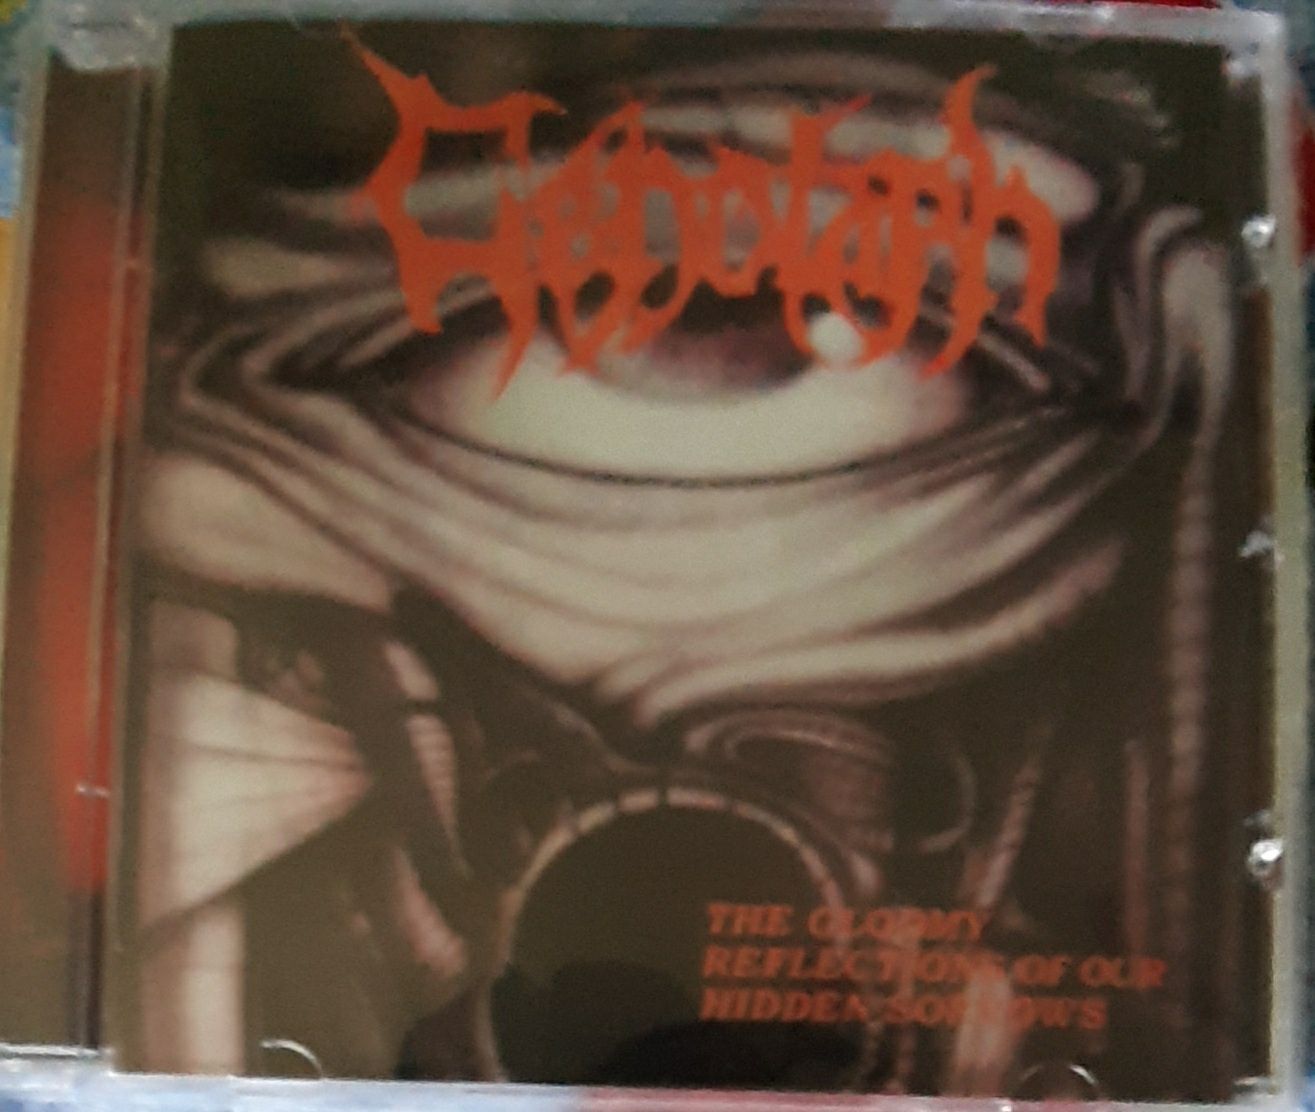 Vendo Cd Cenotaph "The Gloomy Refections of Our Hidden Sorrows"